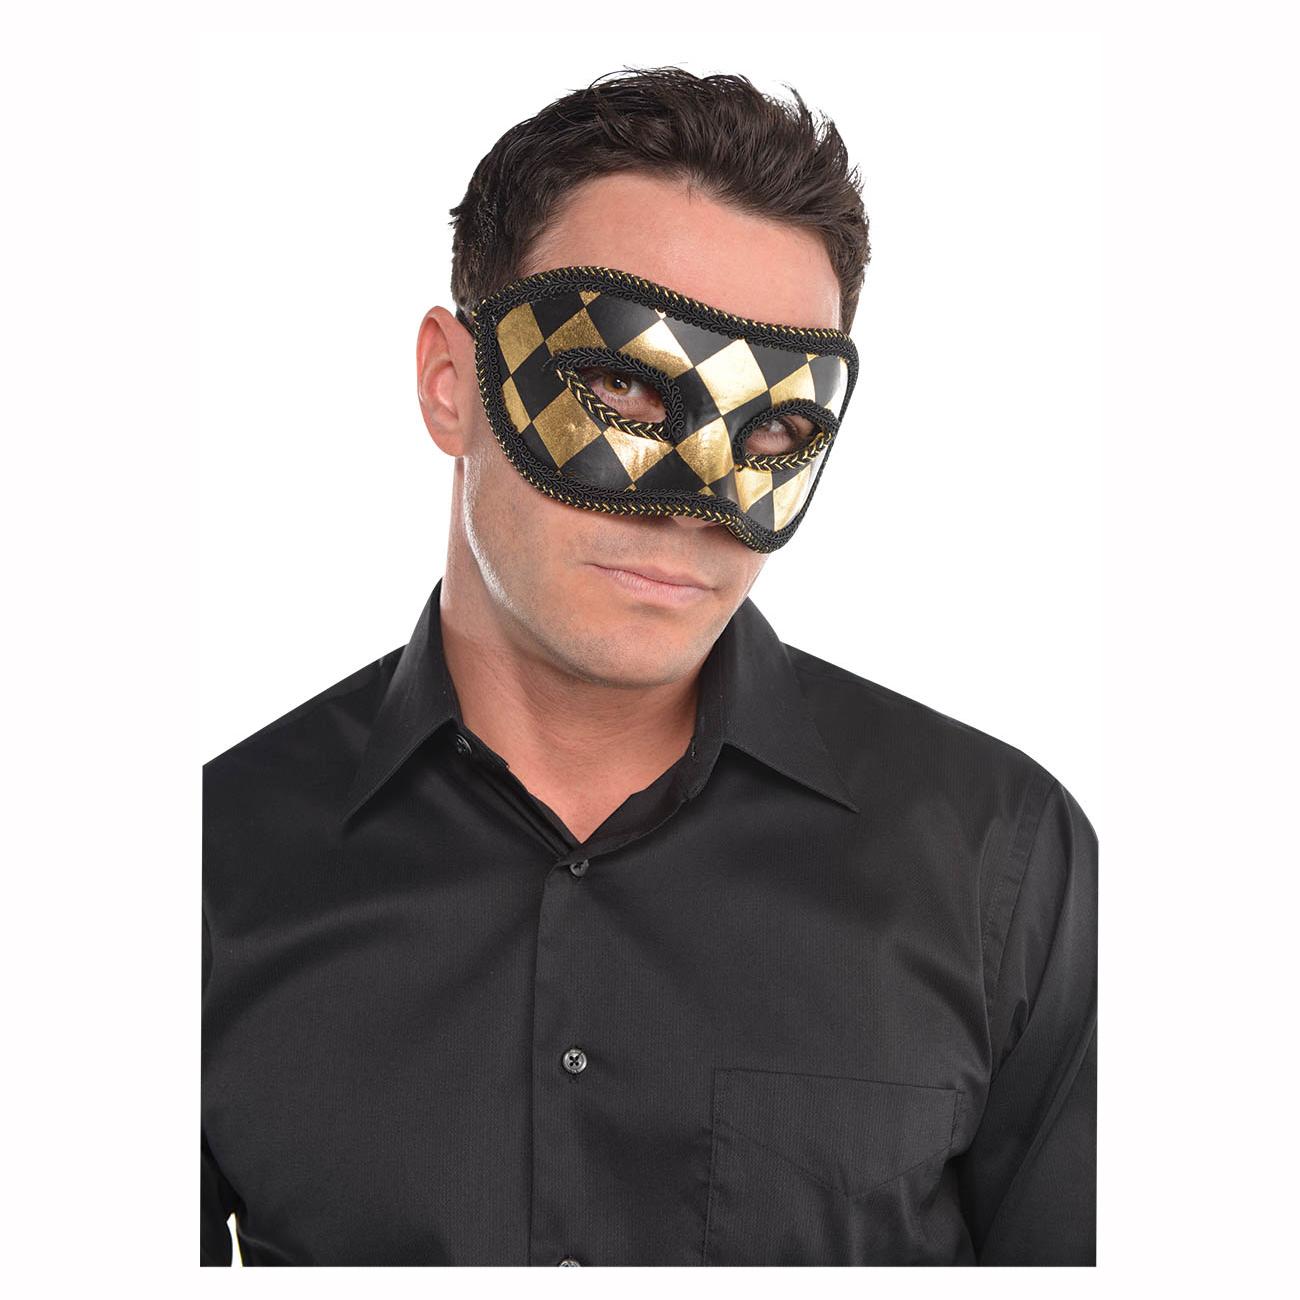 Black/Gold Harlequin Mask Costumes & Apparel - Party Centre